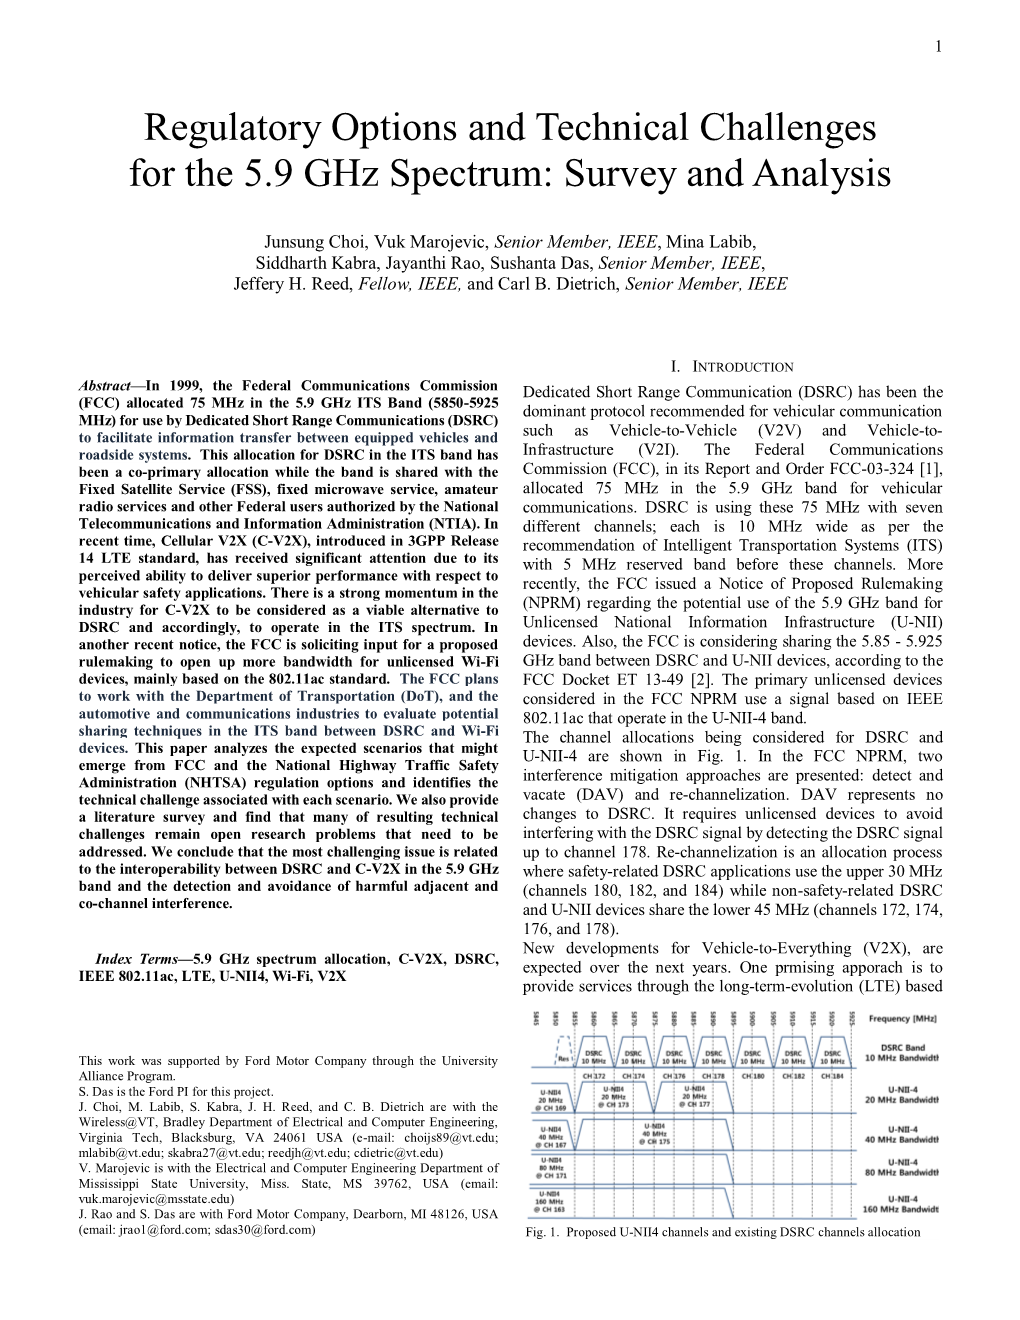 Regulatory Options and Technical Challenges for the 5.9 Ghz Spectrum: Survey and Analysis